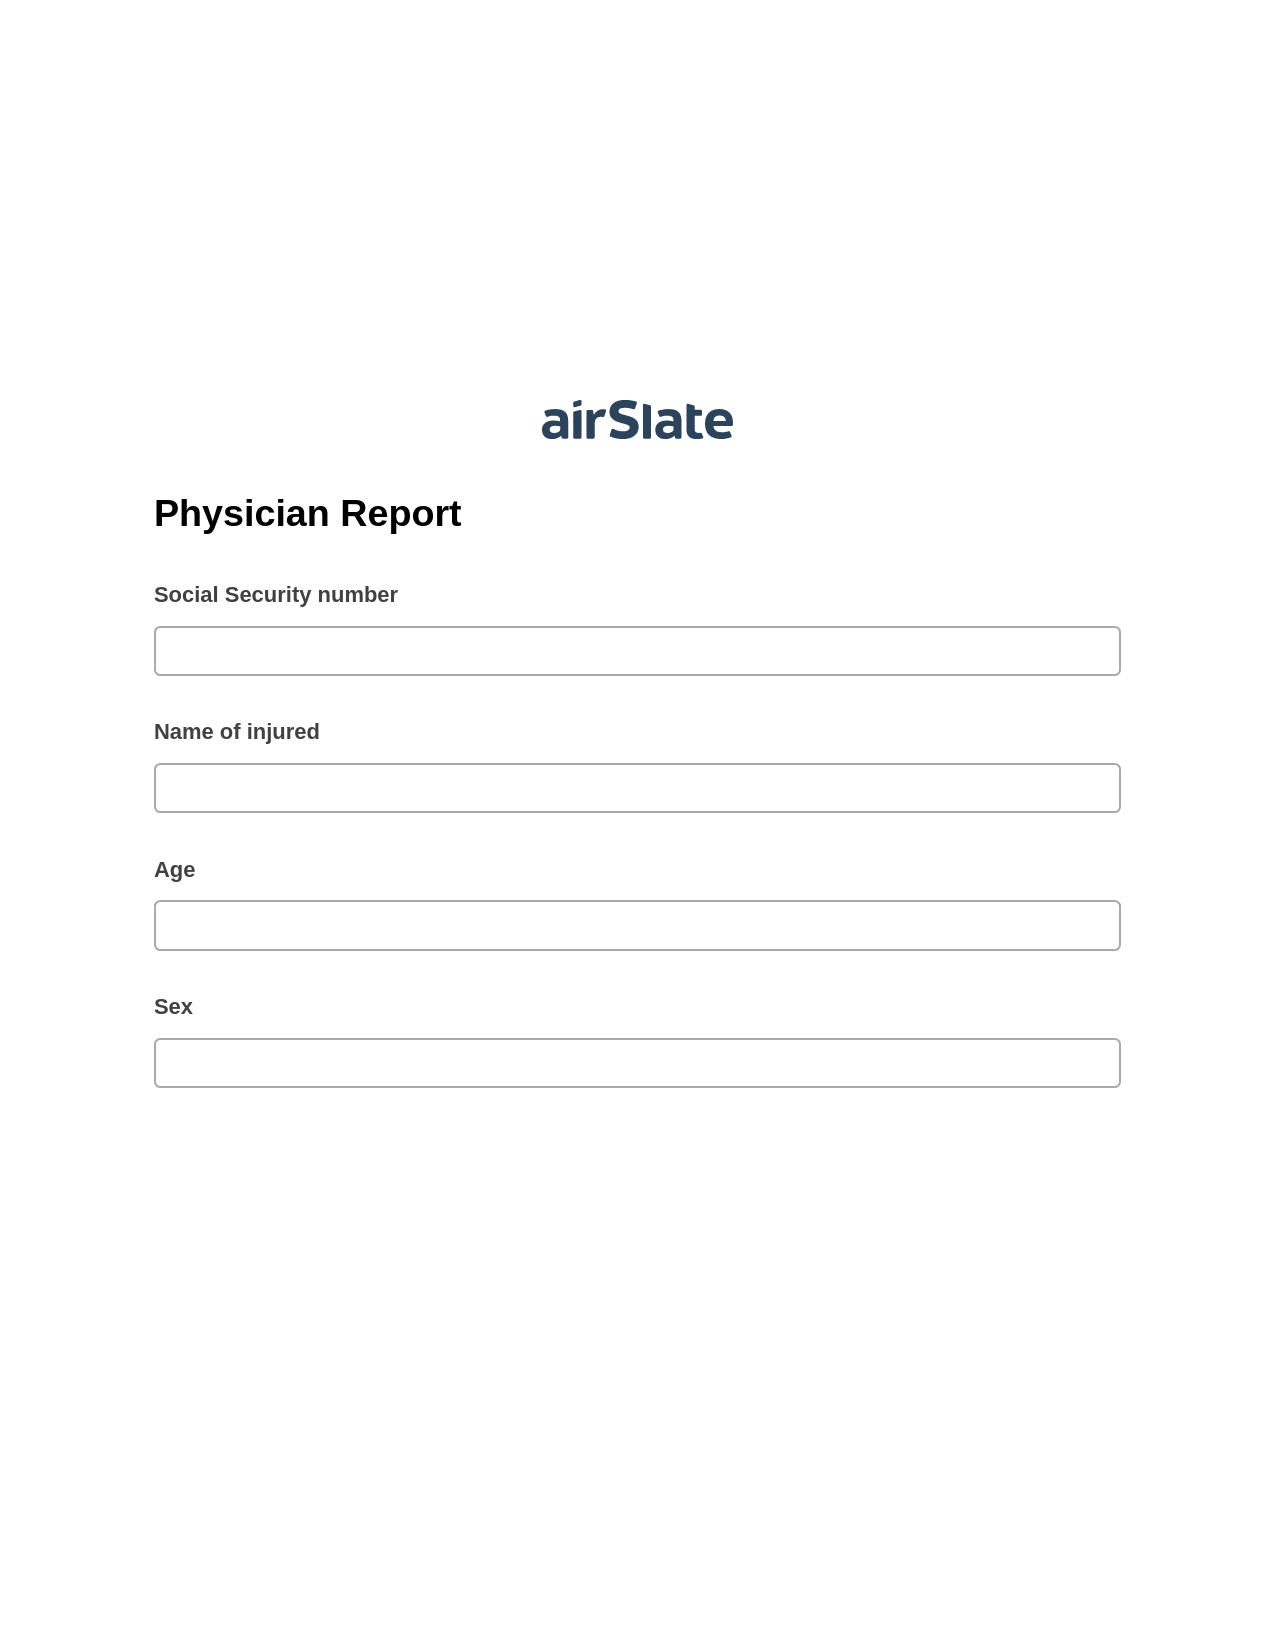 Physician Report Pre-fill from MS Dynamics 365 Records, Google Cloud Print Bot, Slack Two-Way Binding Bot